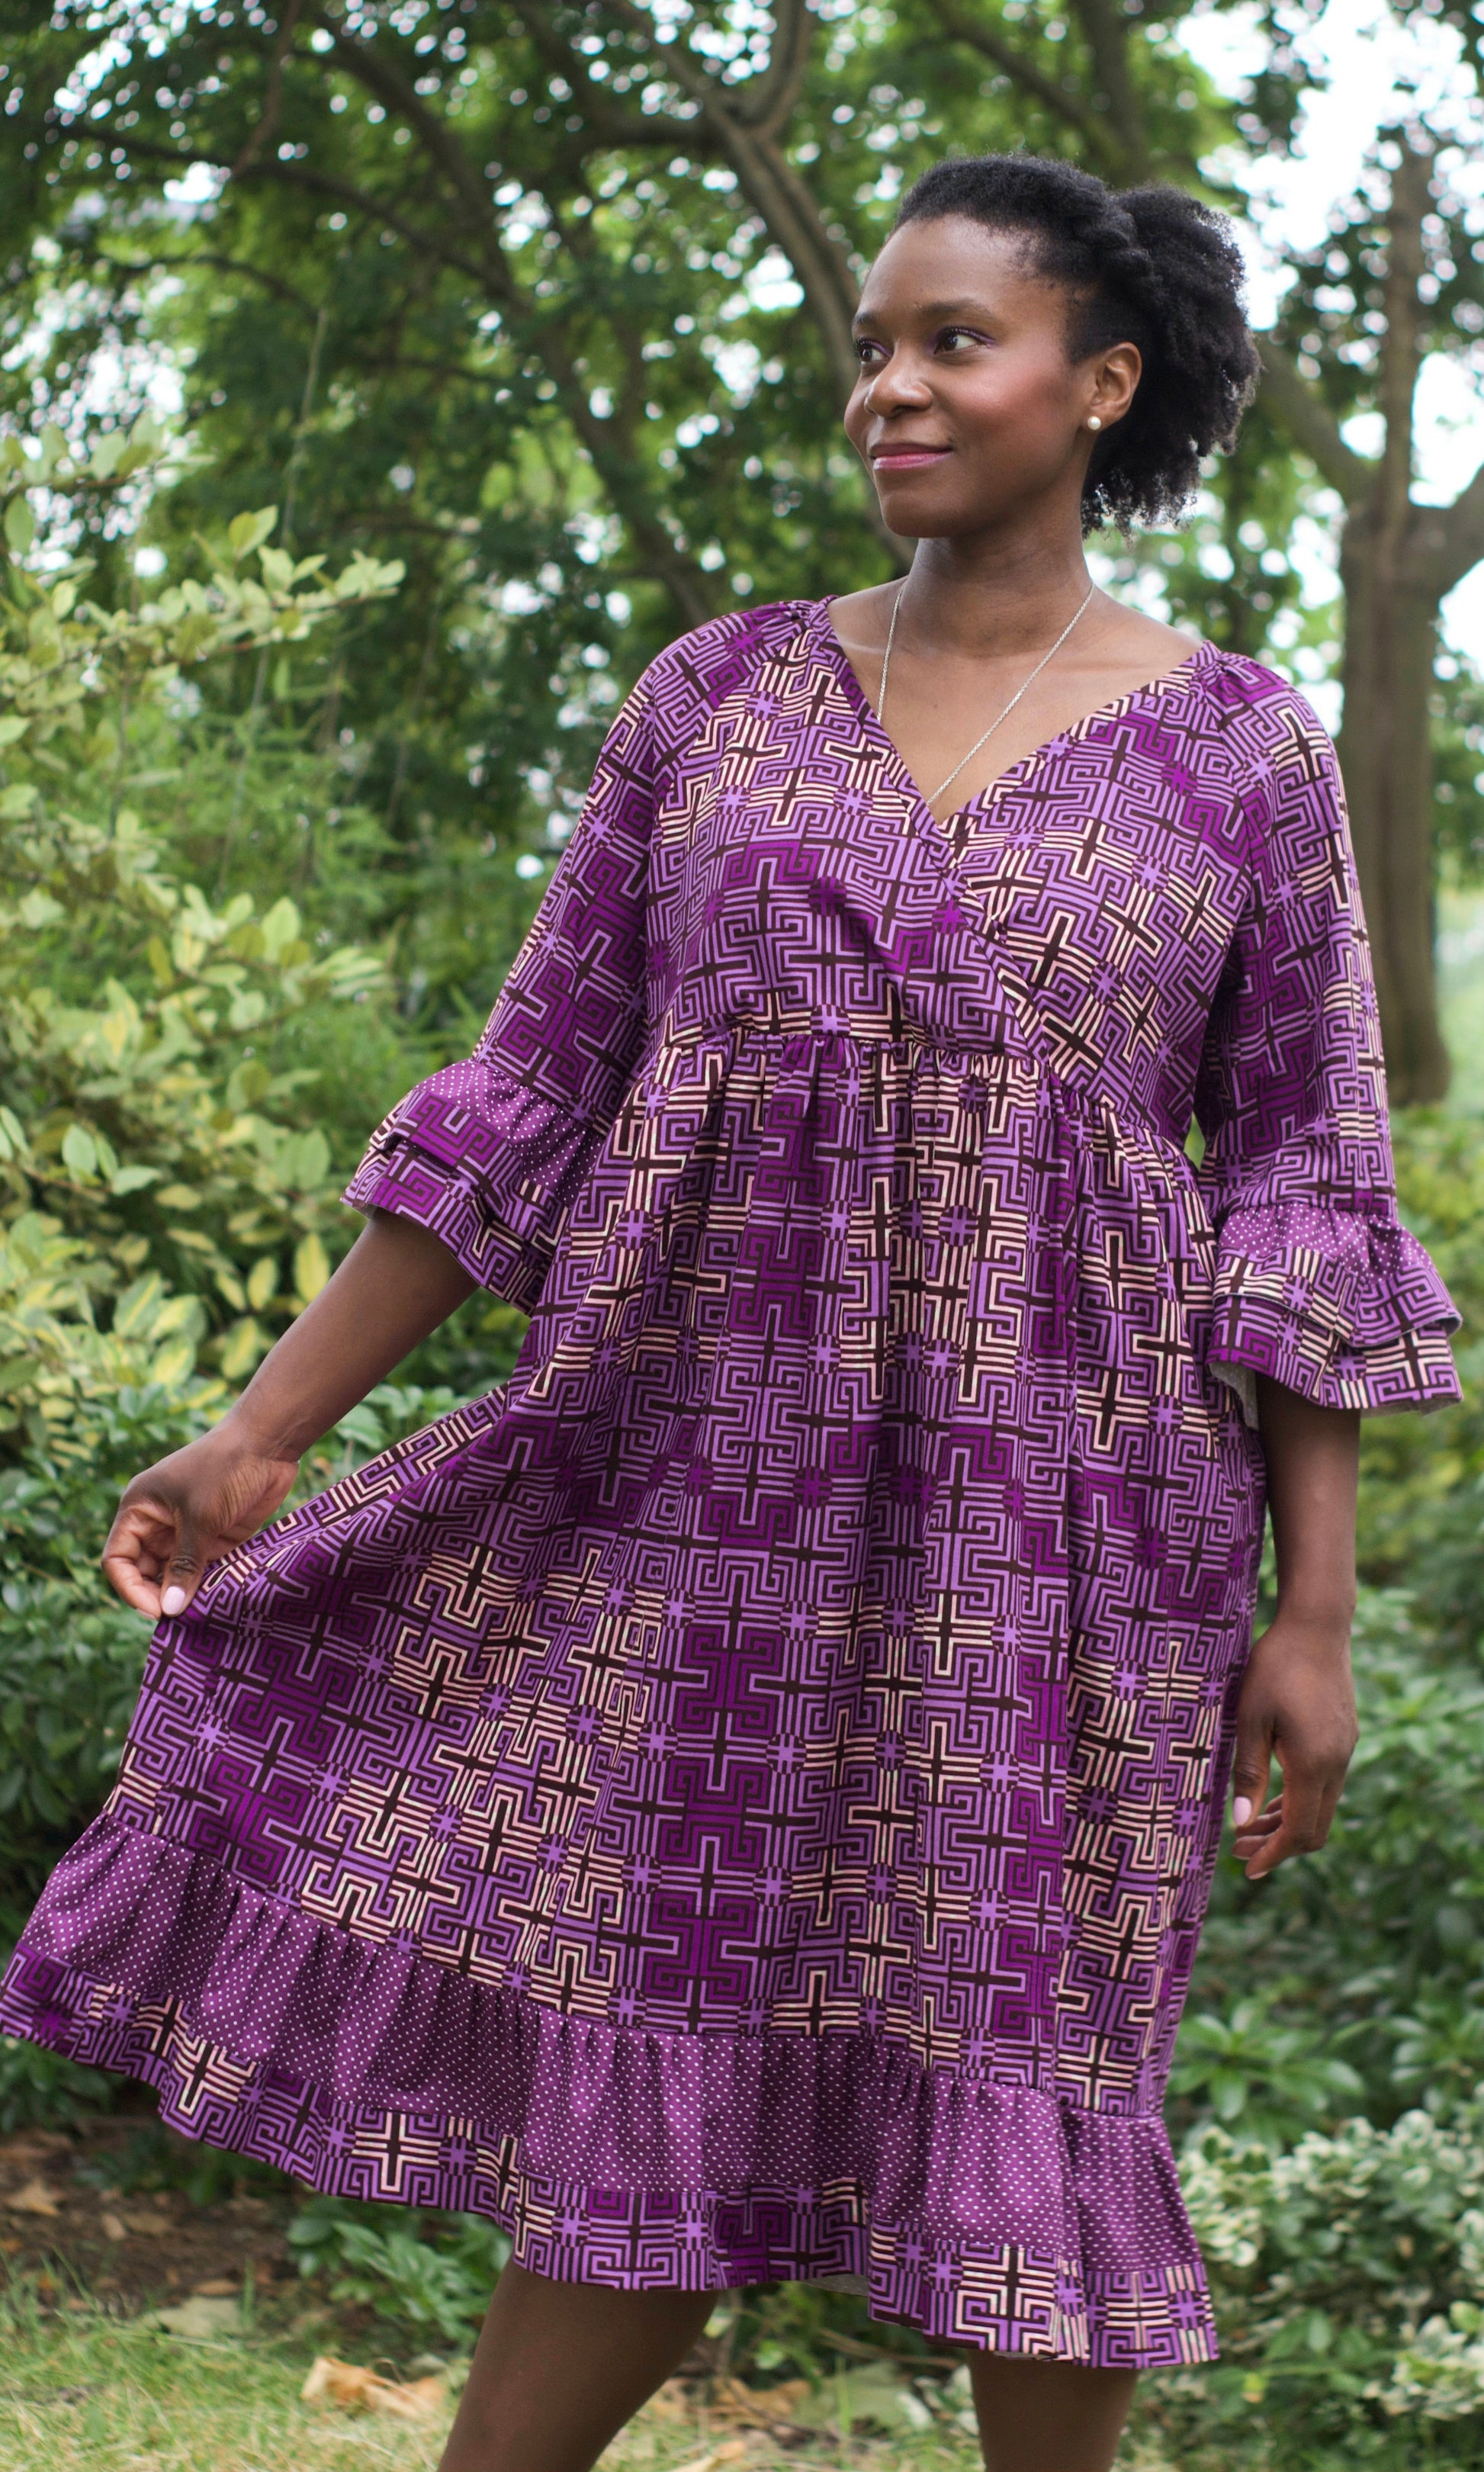 A woman exuding casual elegance while wearing the purple ruffle dress in a serene park setting.